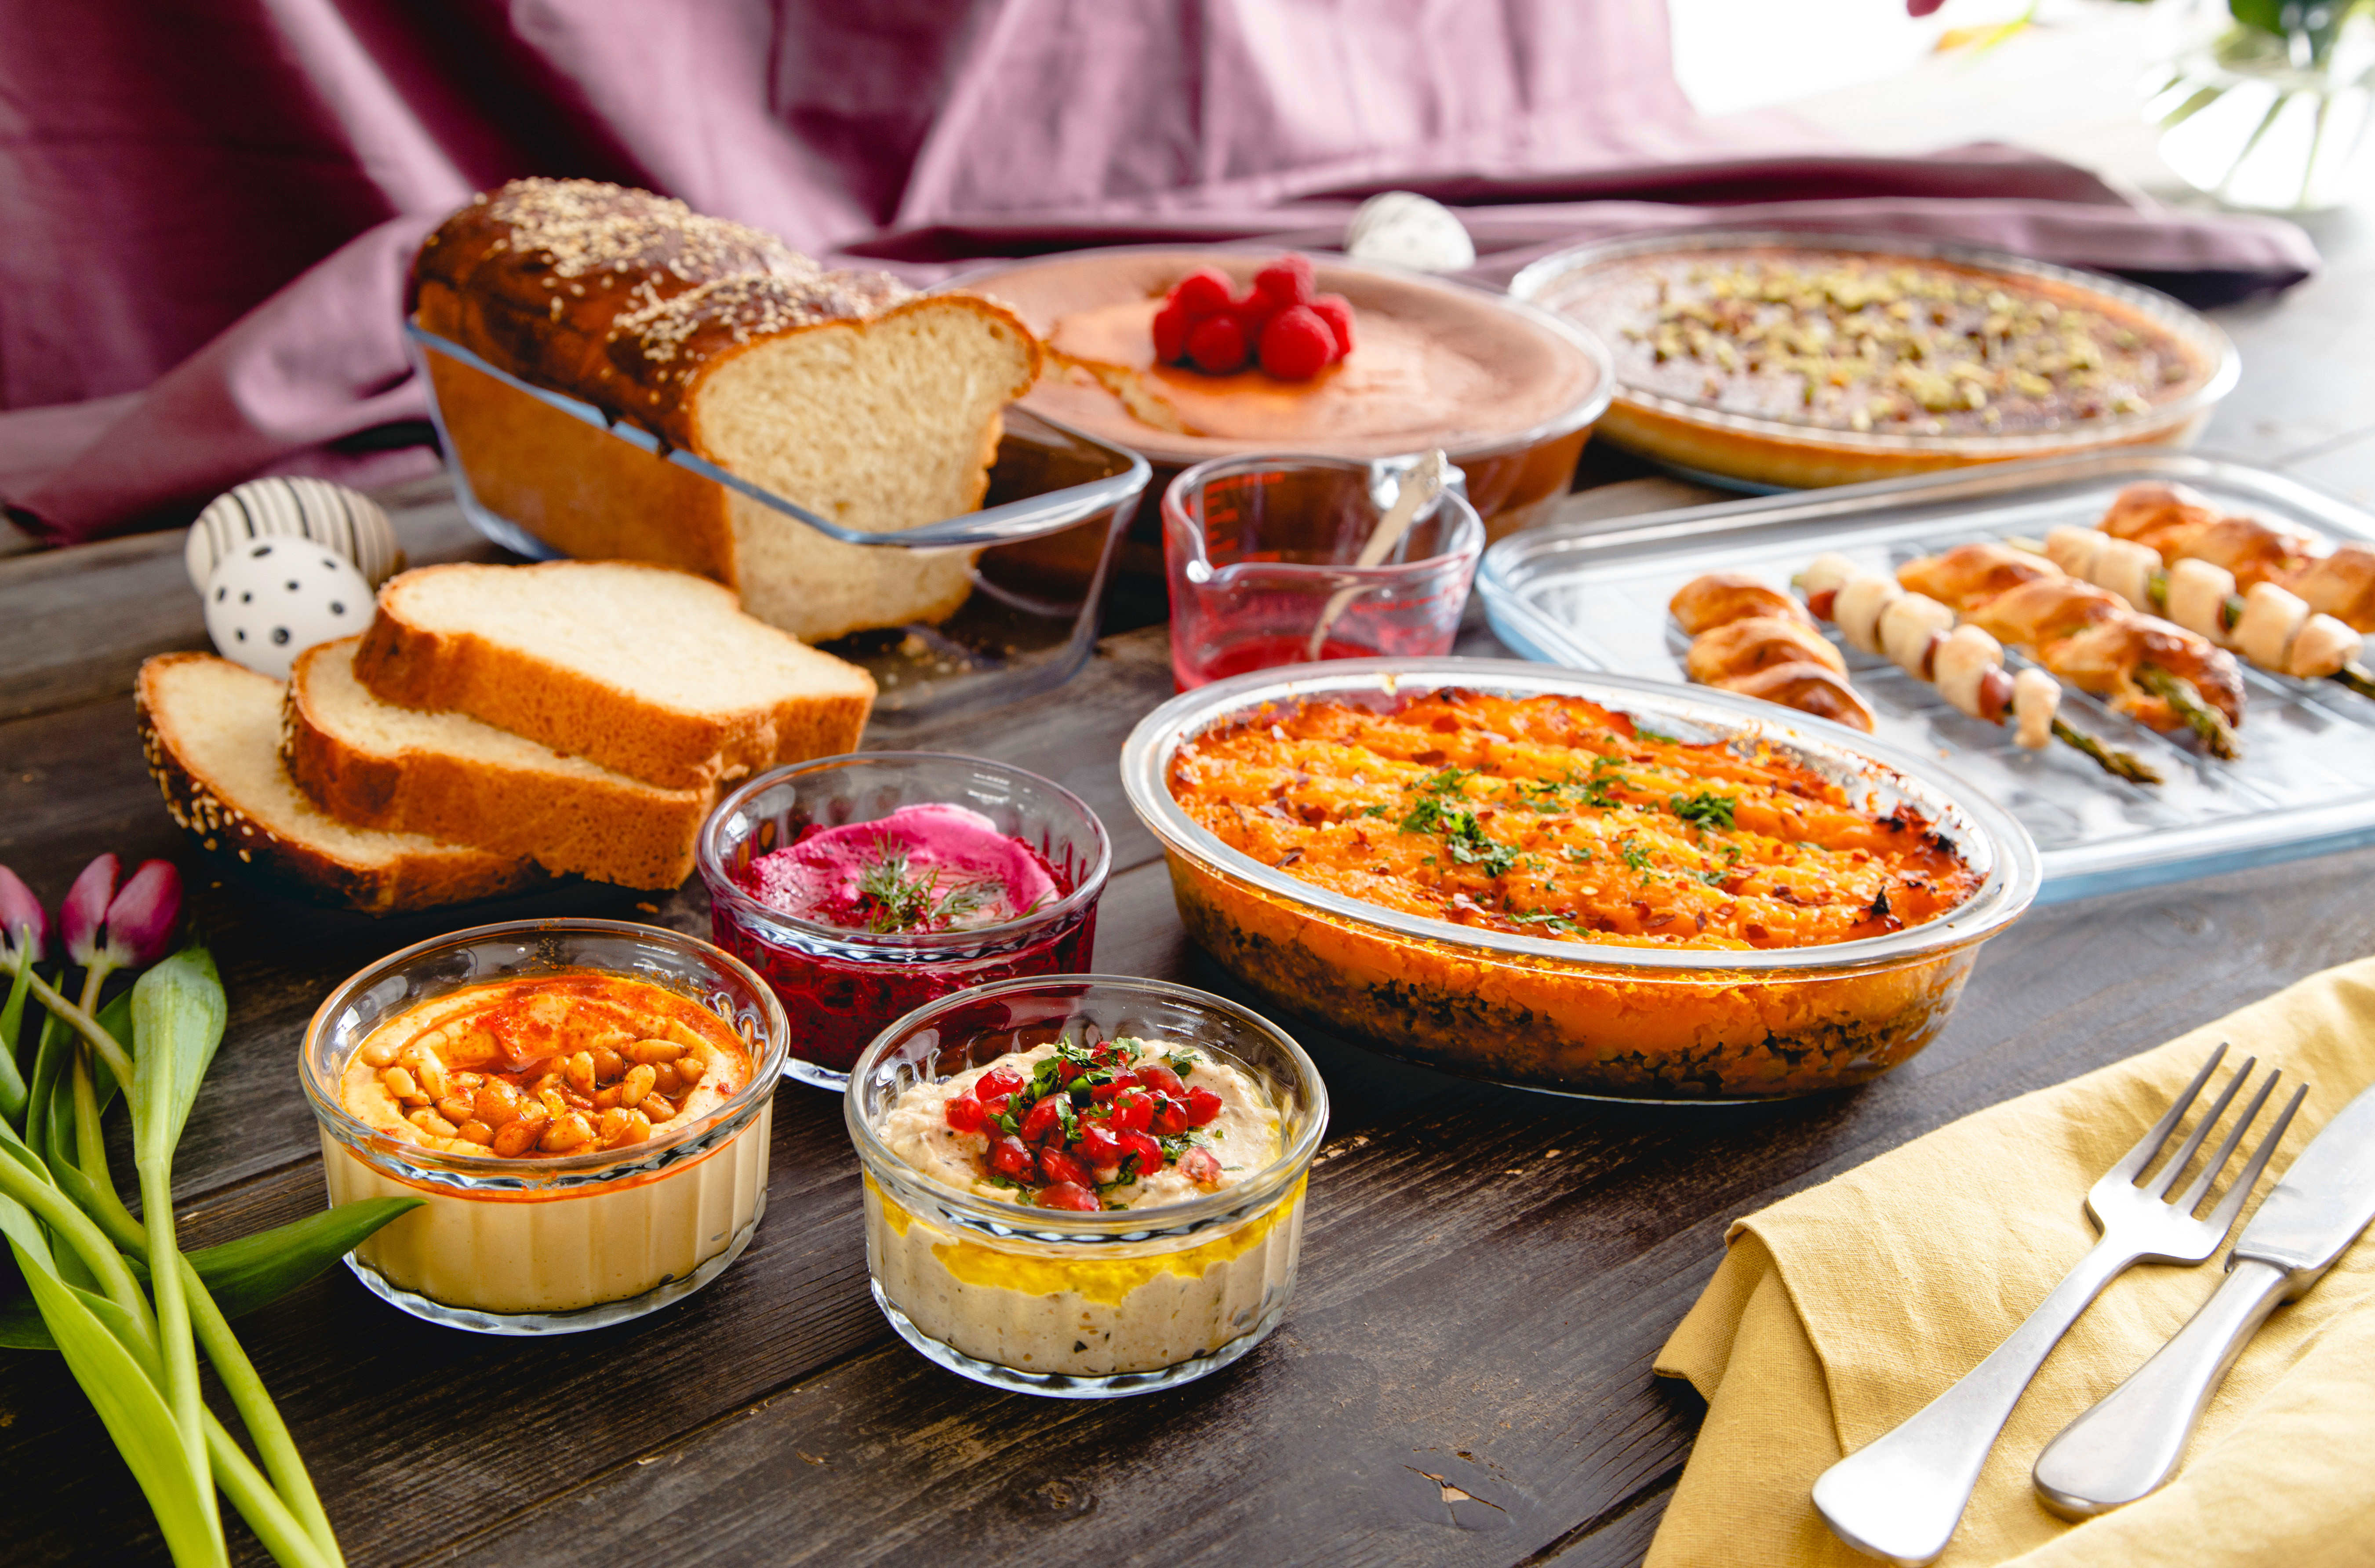 Easter Dinner For A Crowd
 CREATE AN INSTAGRAM WORTHY EASTER FEAST WITH PYREX’S TOP